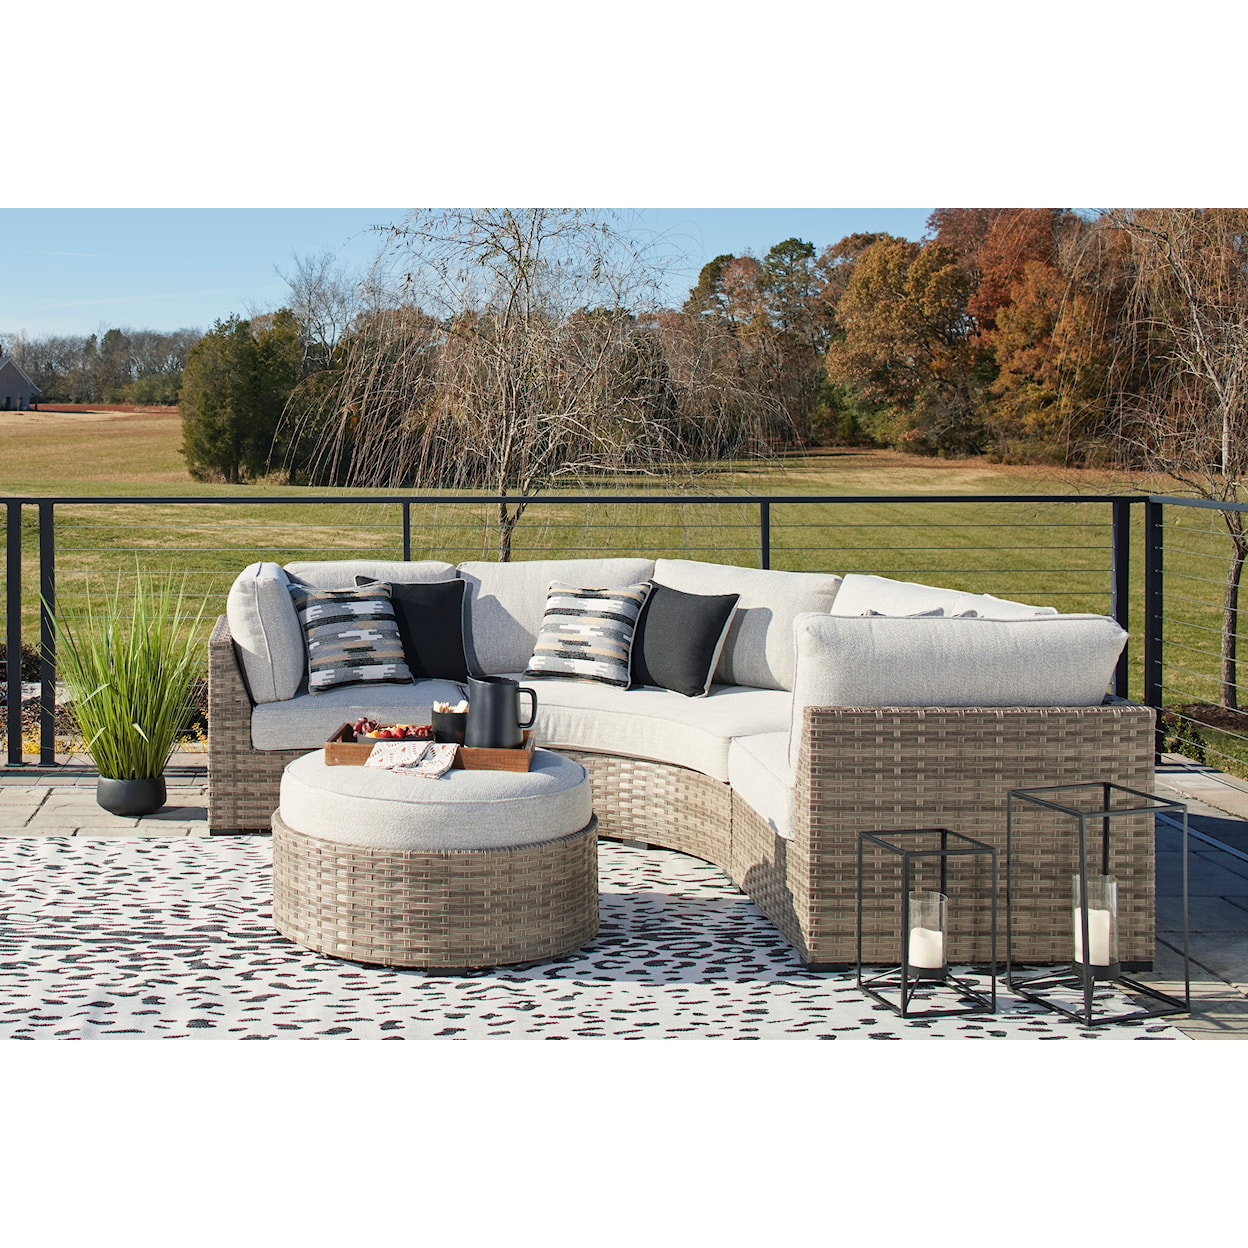 Ashley Furniture Signature Design Calworth 3-Piece Outdoor Sectional